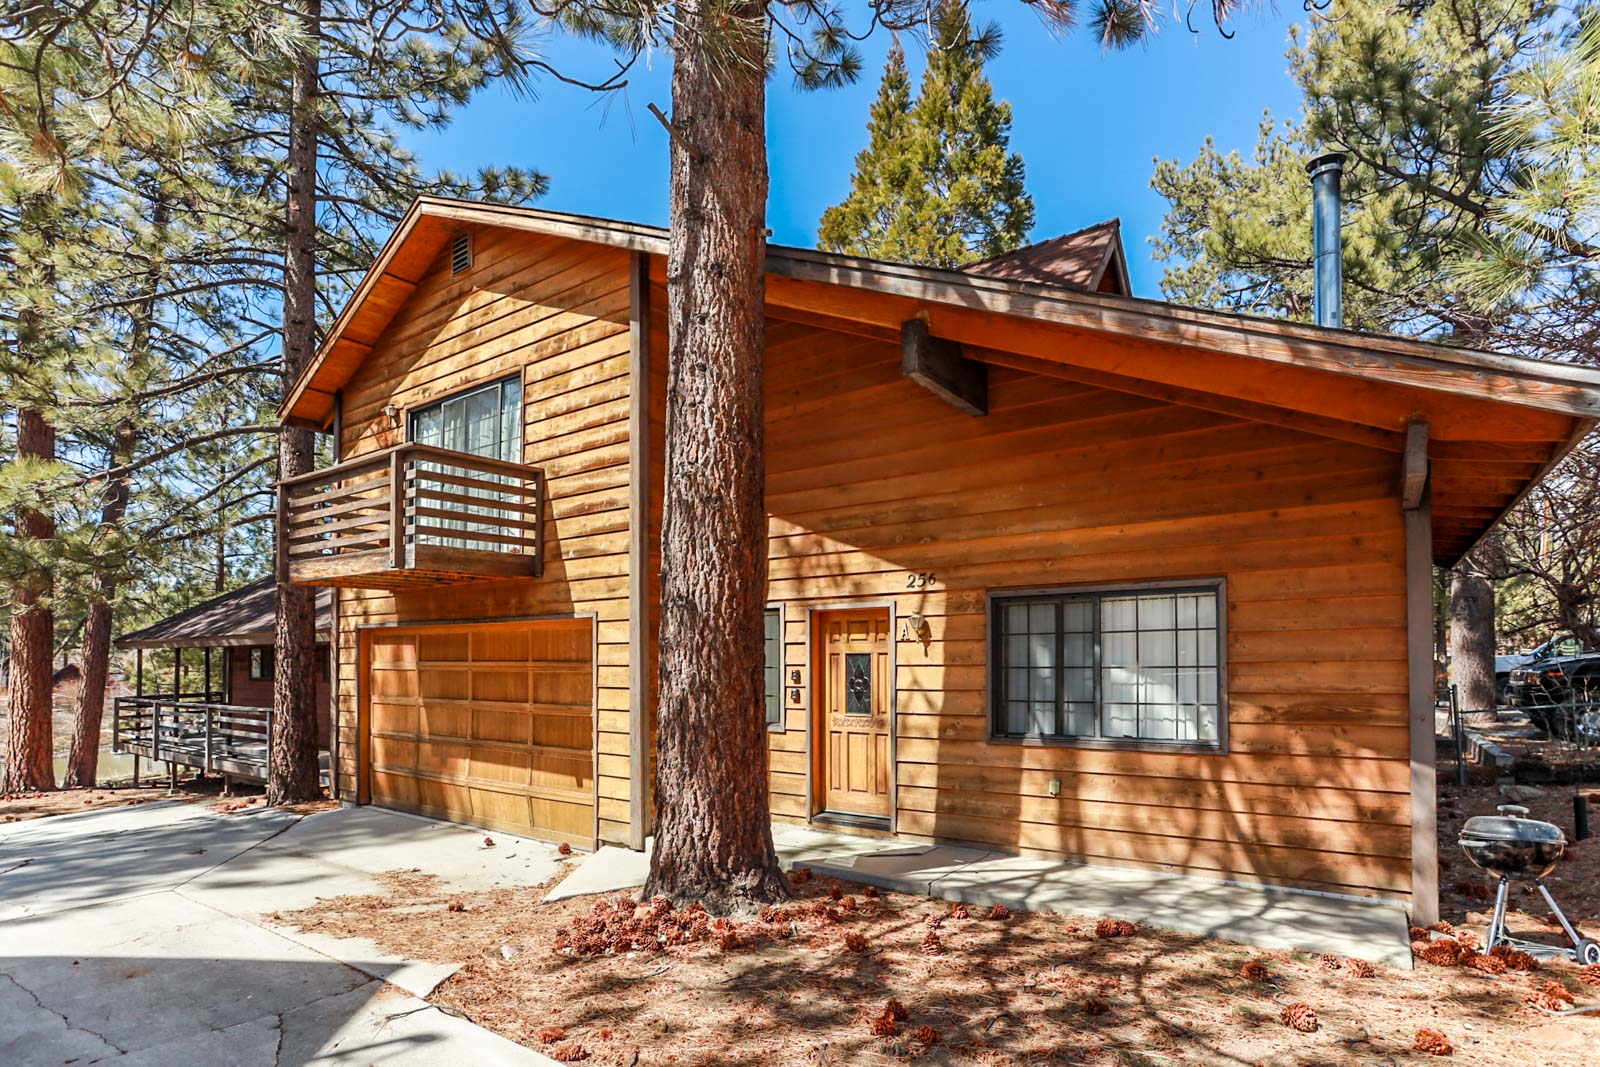 One of our isolated cabin rentals at Big Bear Lake.